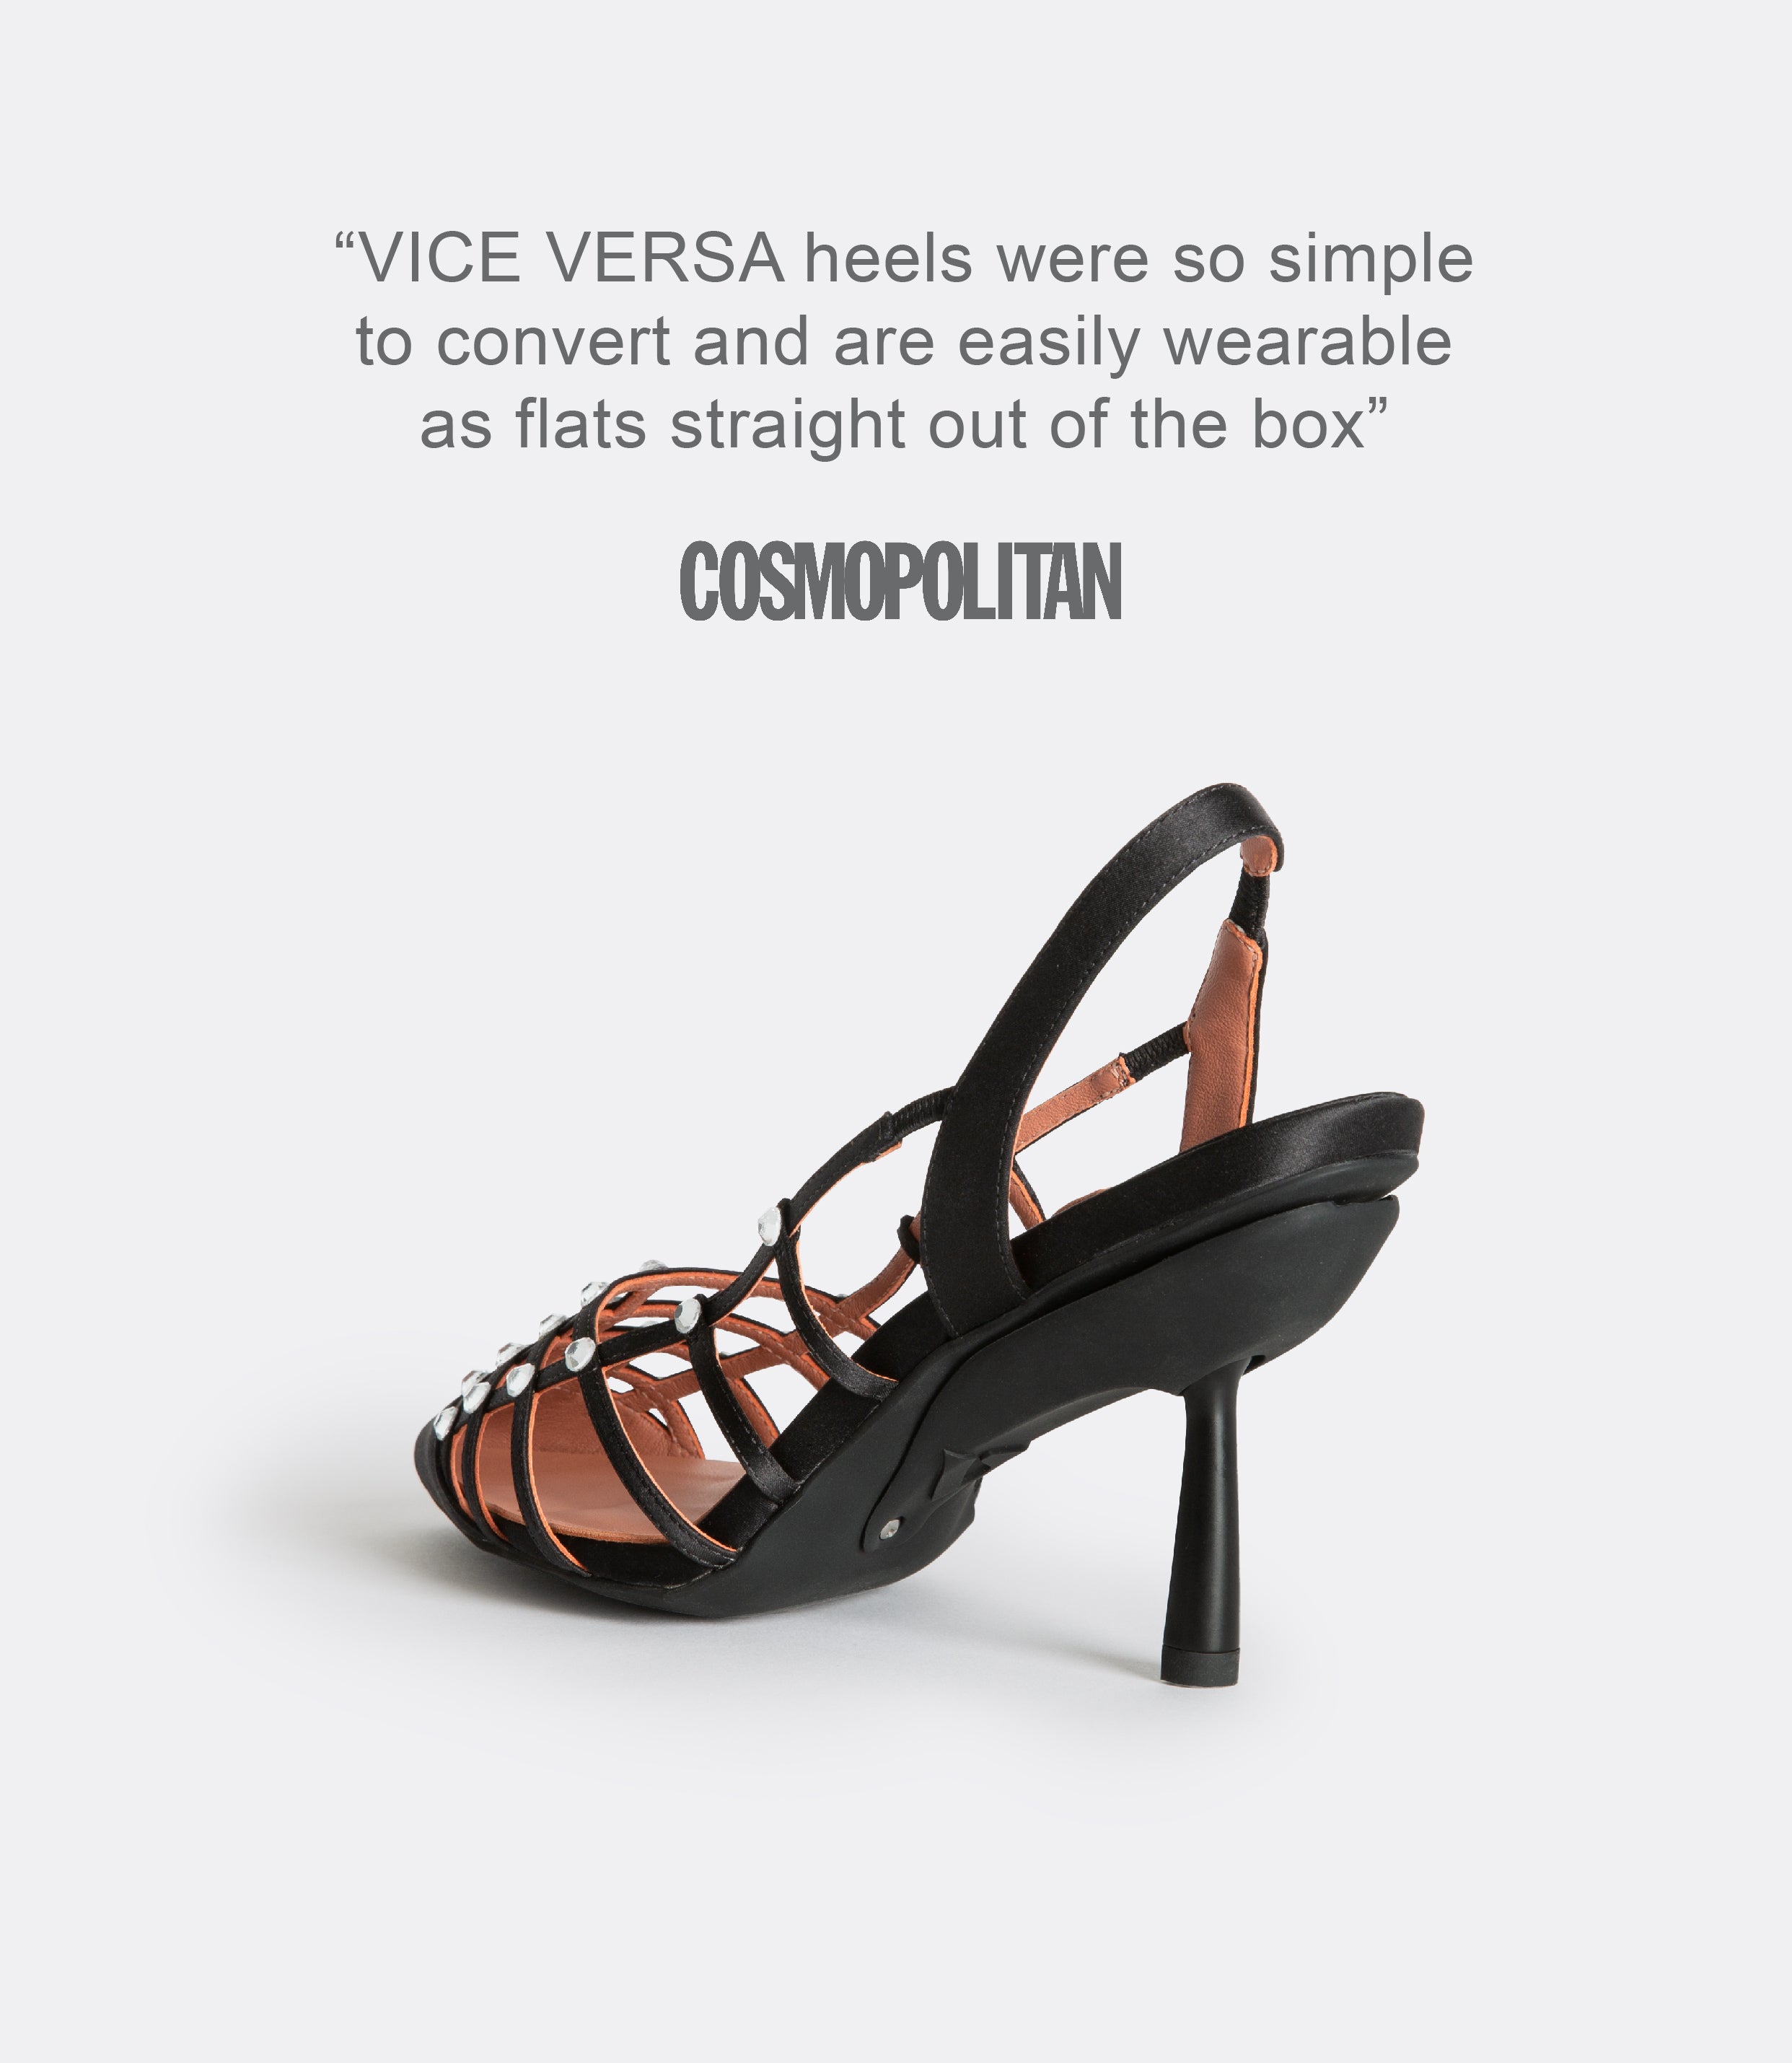 A quote from Cosmopolitan and a back view of the black cage crystal heels